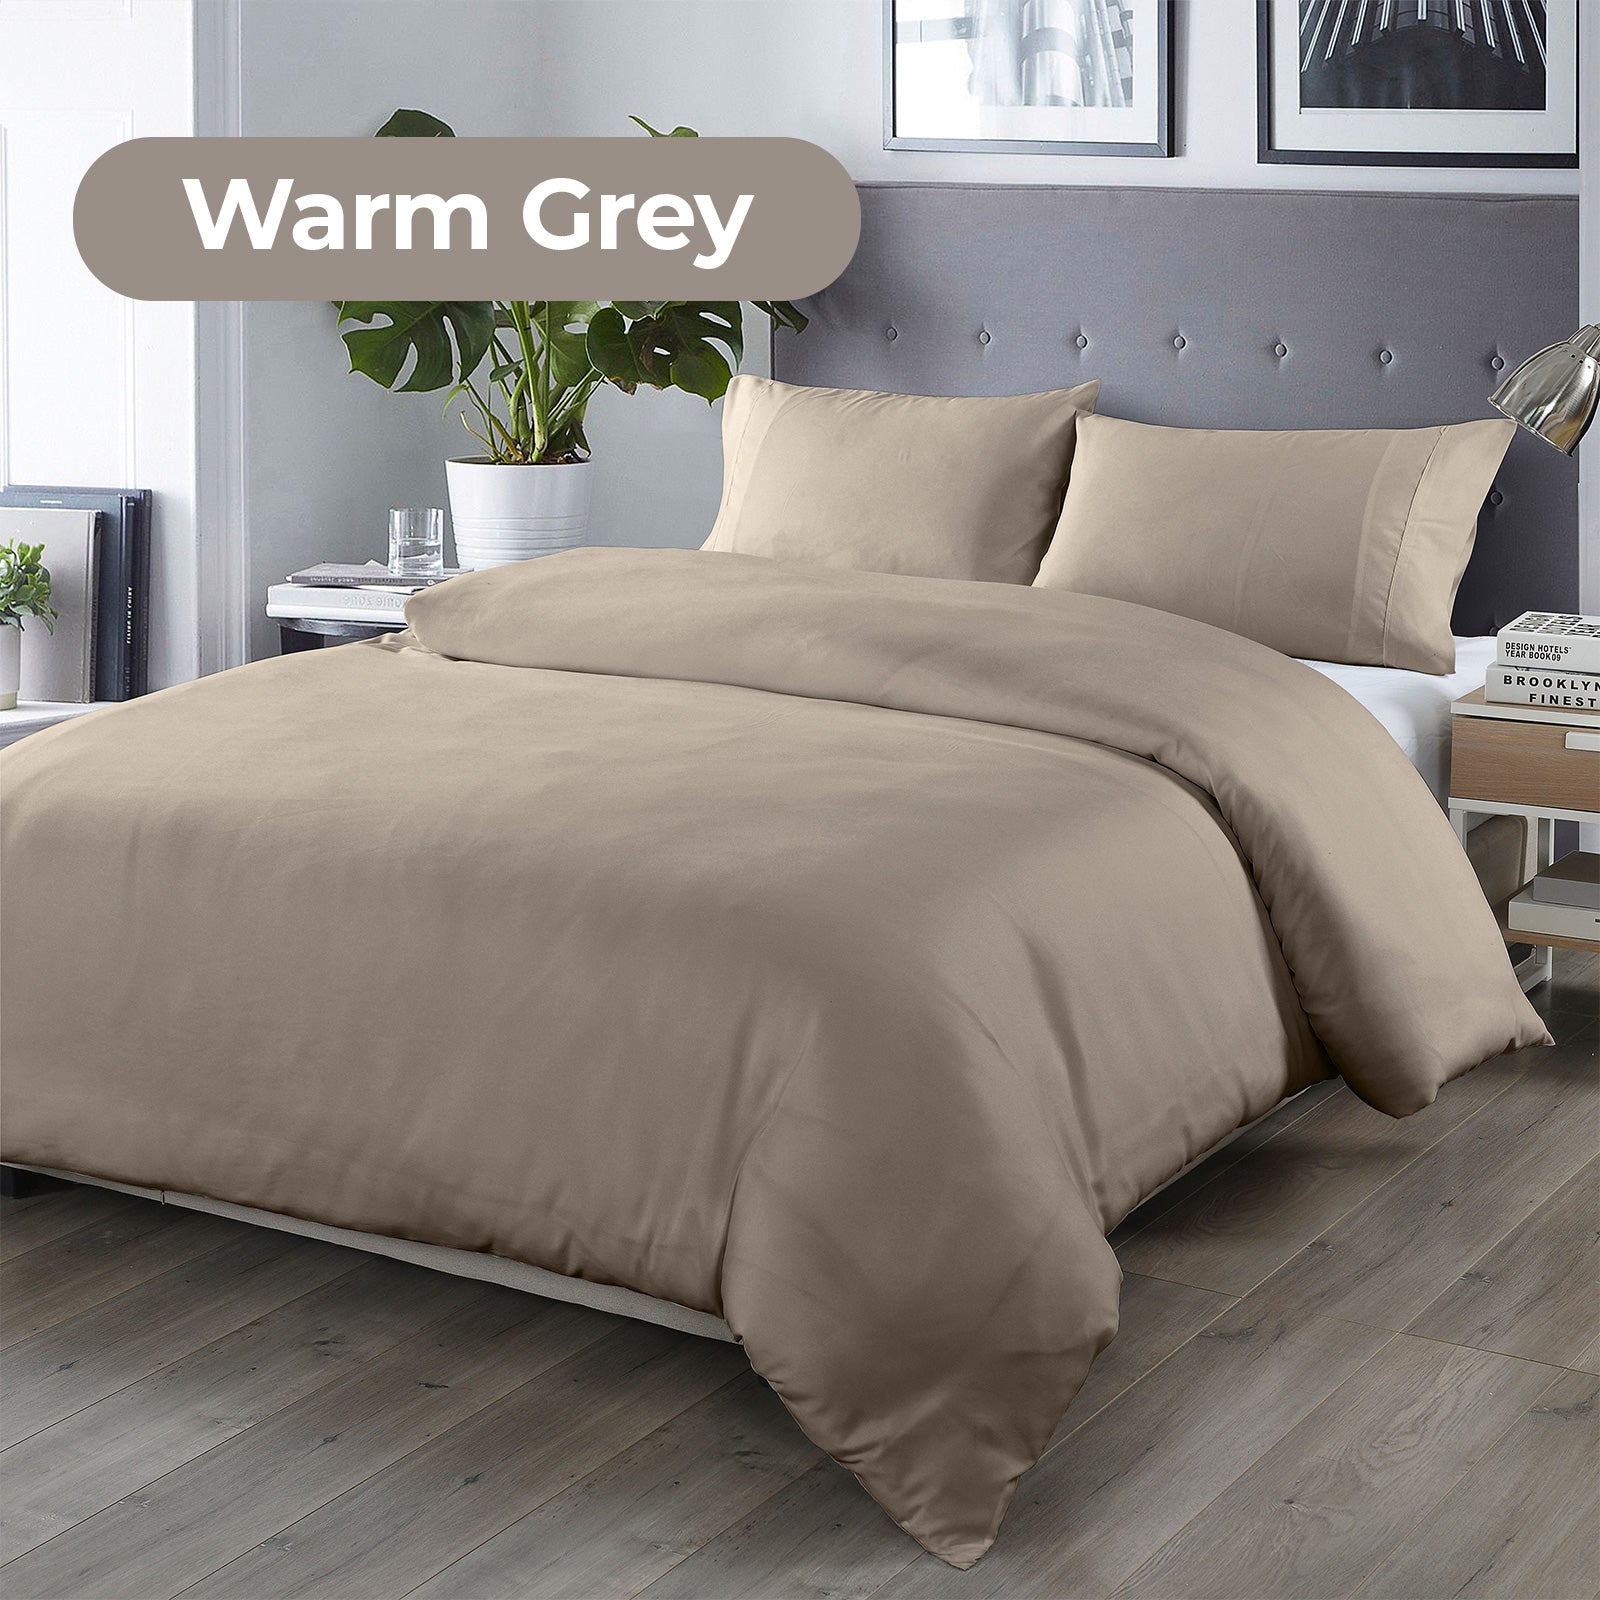 Royal Comfort Bamboo Blended Quilt Cover Set 1000TC Ultra Soft Luxury Bedding - King - Grey from Deals499 at Deals499